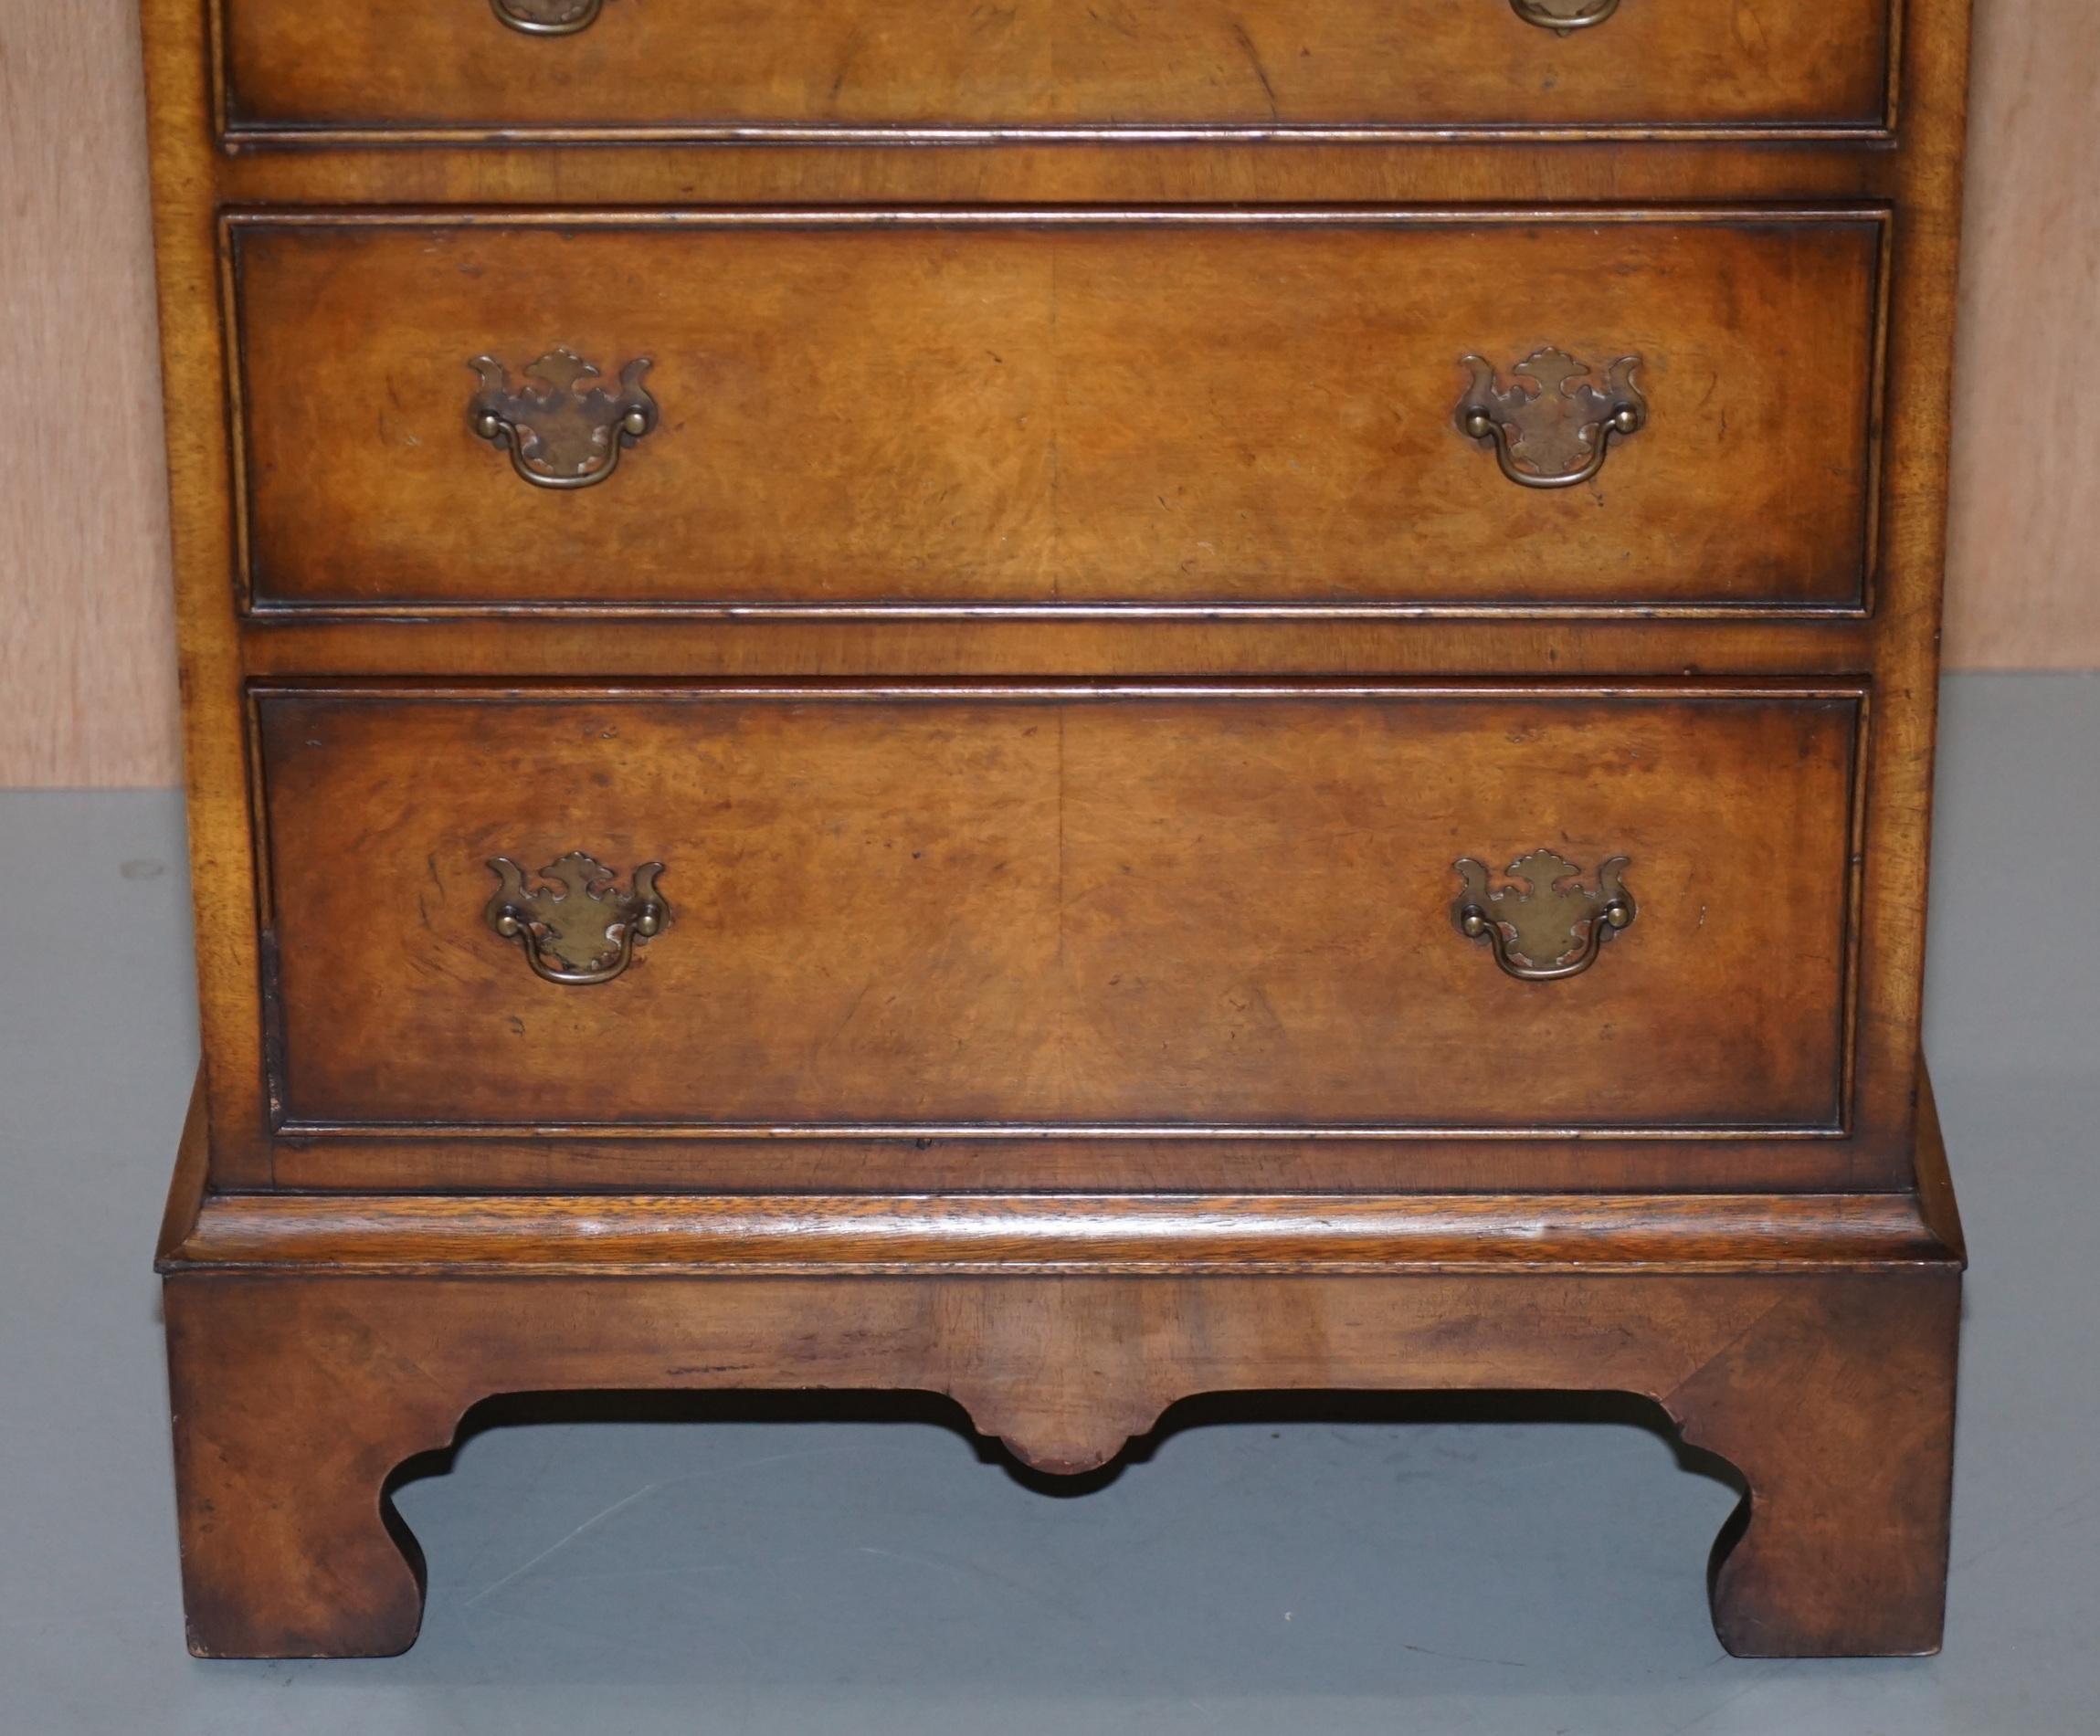 20th Century Vintage Burr Walnut Side Table Sized Chest of Drawers with Butlers Serving Tray